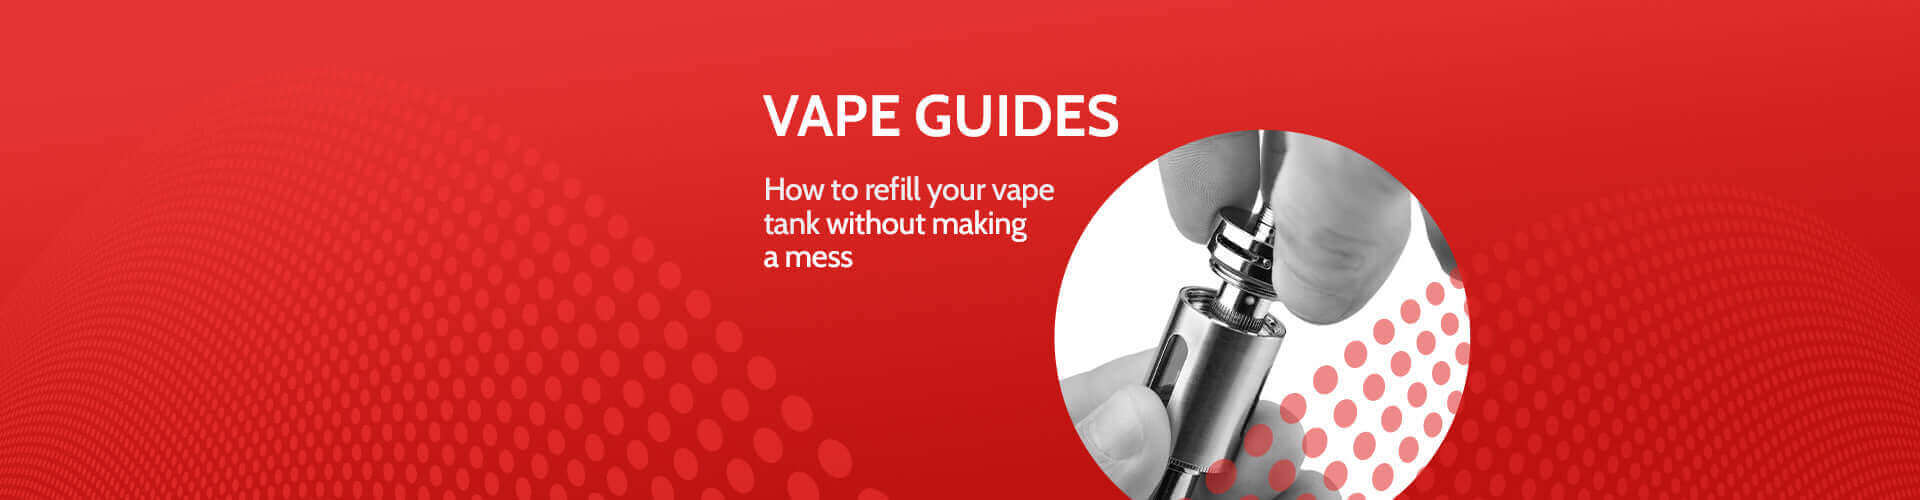 Vape Guides: How to refill your vape kit without making a mess - 888 Vapour